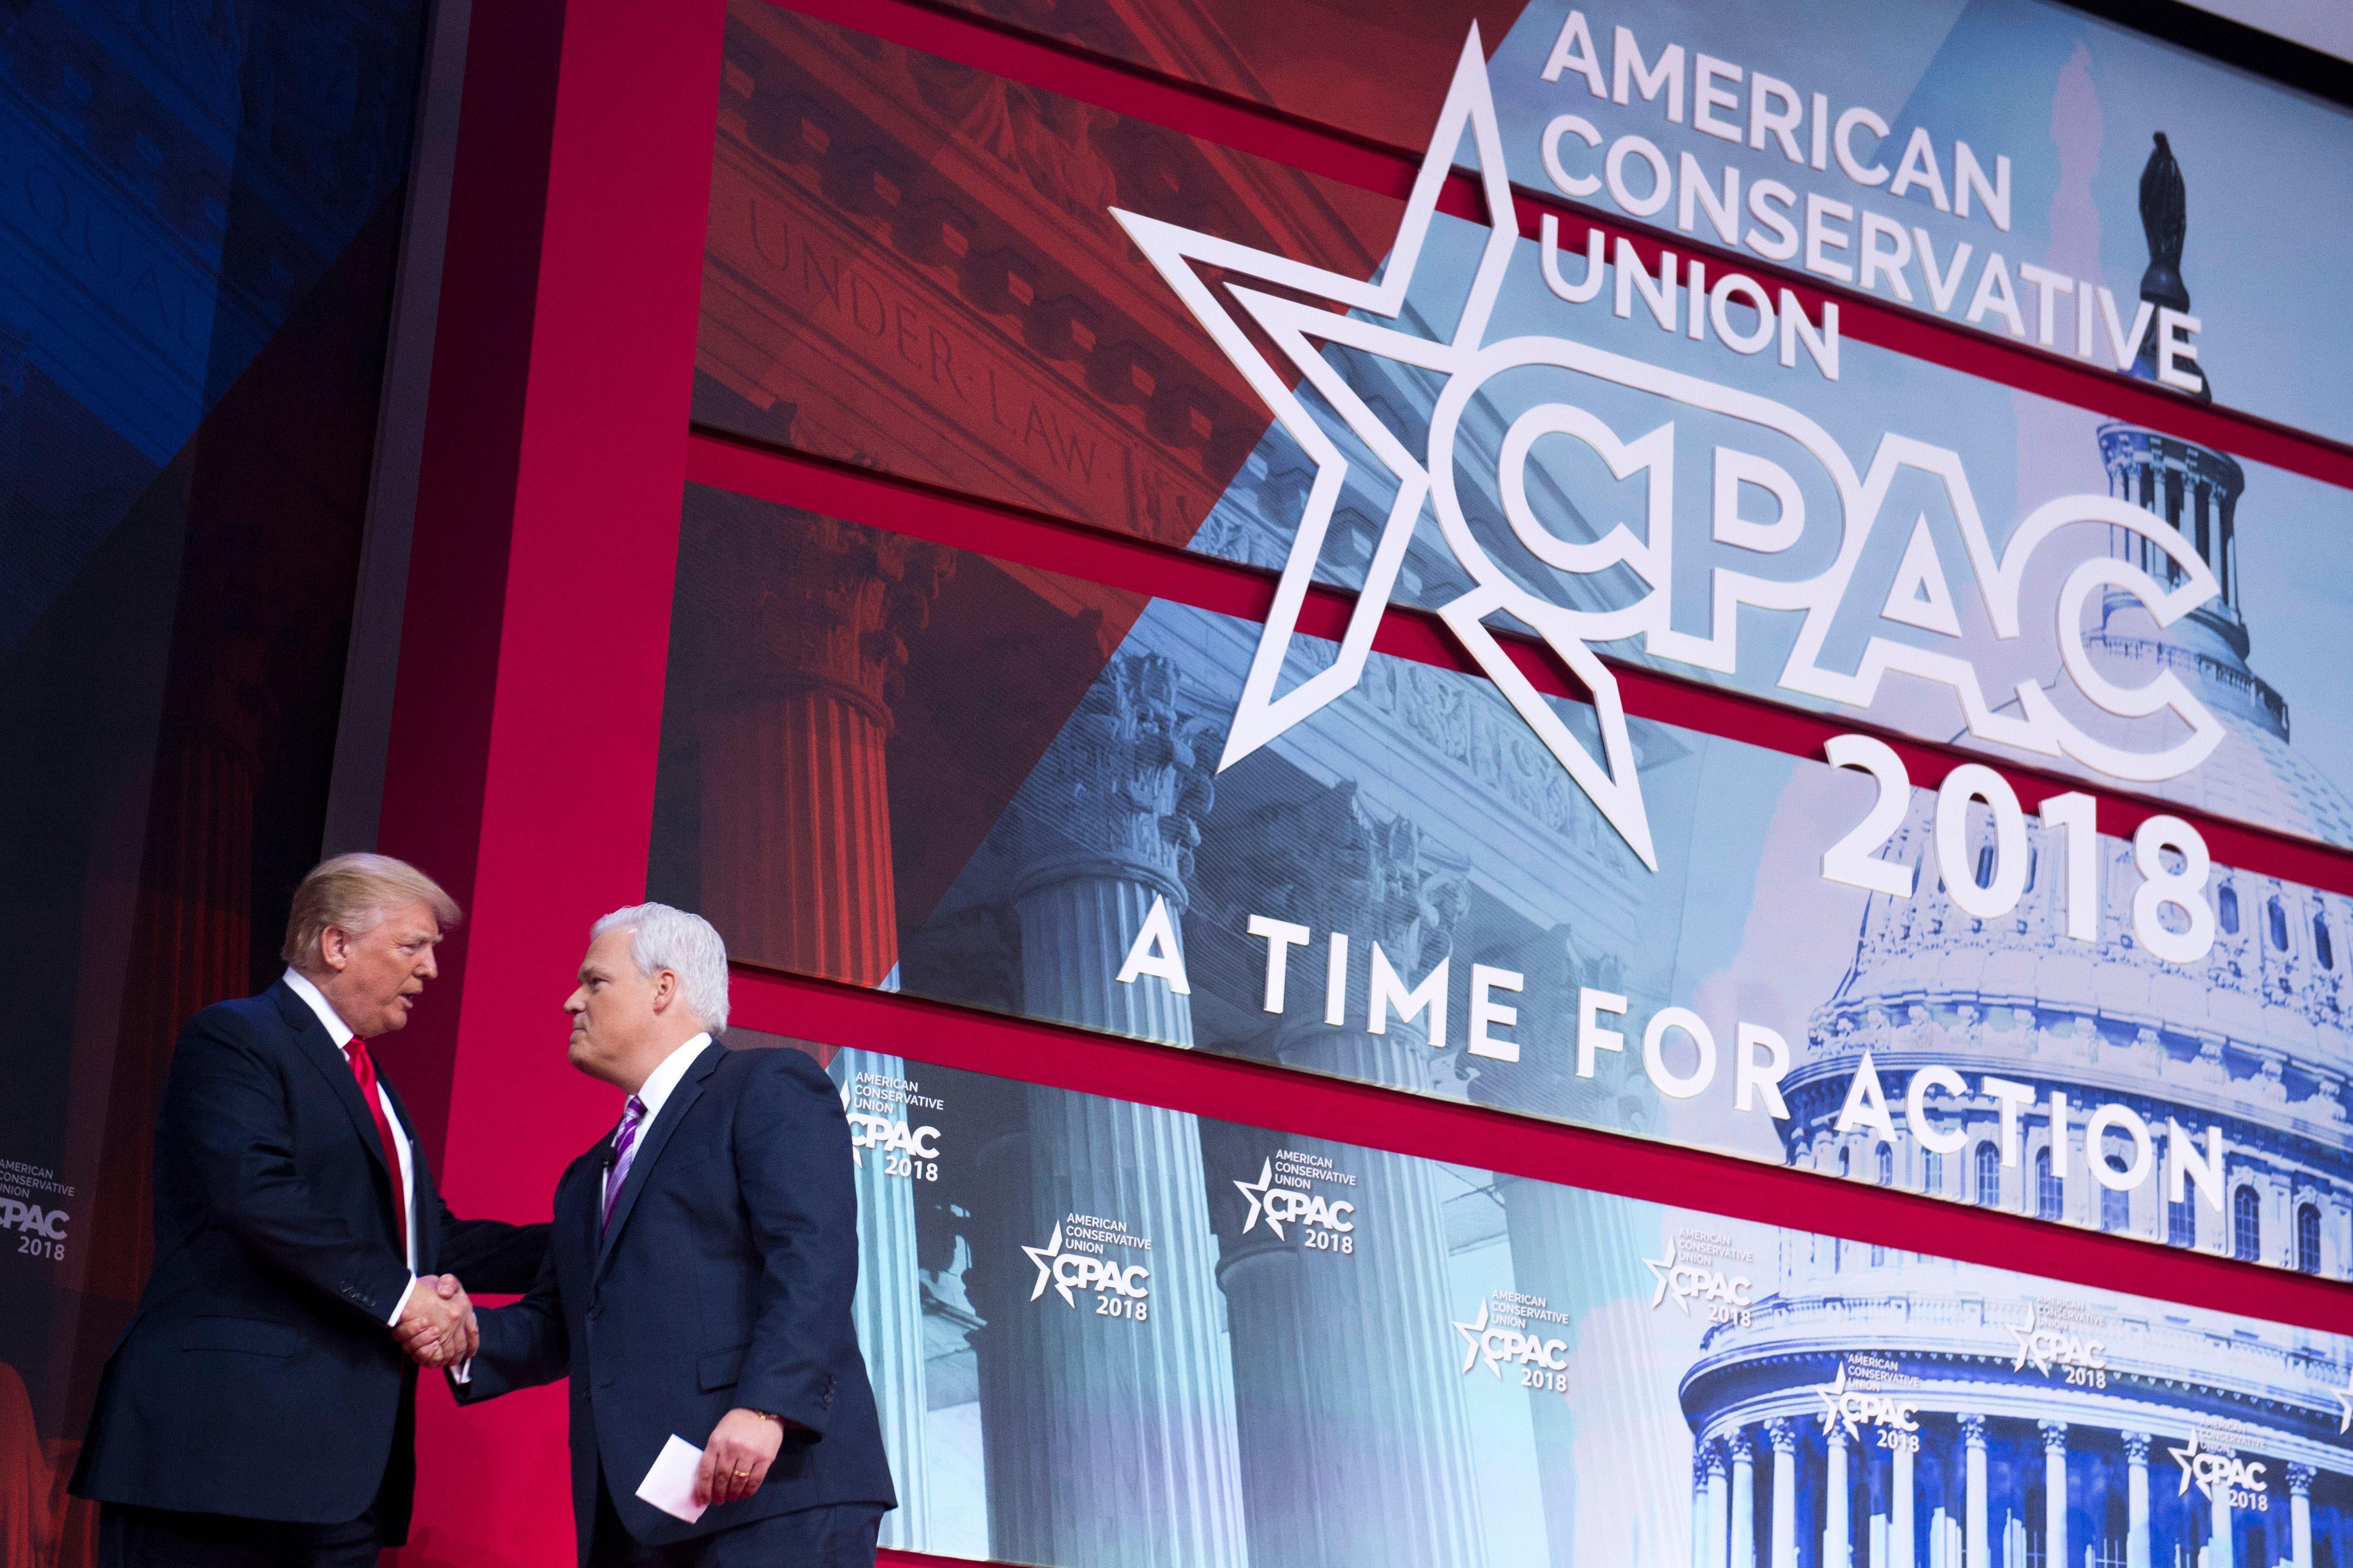 US President Donald Trump shakes hands with Matt Schlapp, chairman of the American Conservative Union, during the 2018 Conservative Political Action Conference (CPAC) at National Harbor in Oxon Hill, Maryland, February 23, 2018. / AFP PHOTO / SAUL LOEB        (Photo credit should read SAUL LOEB/AFP/Getty Images)